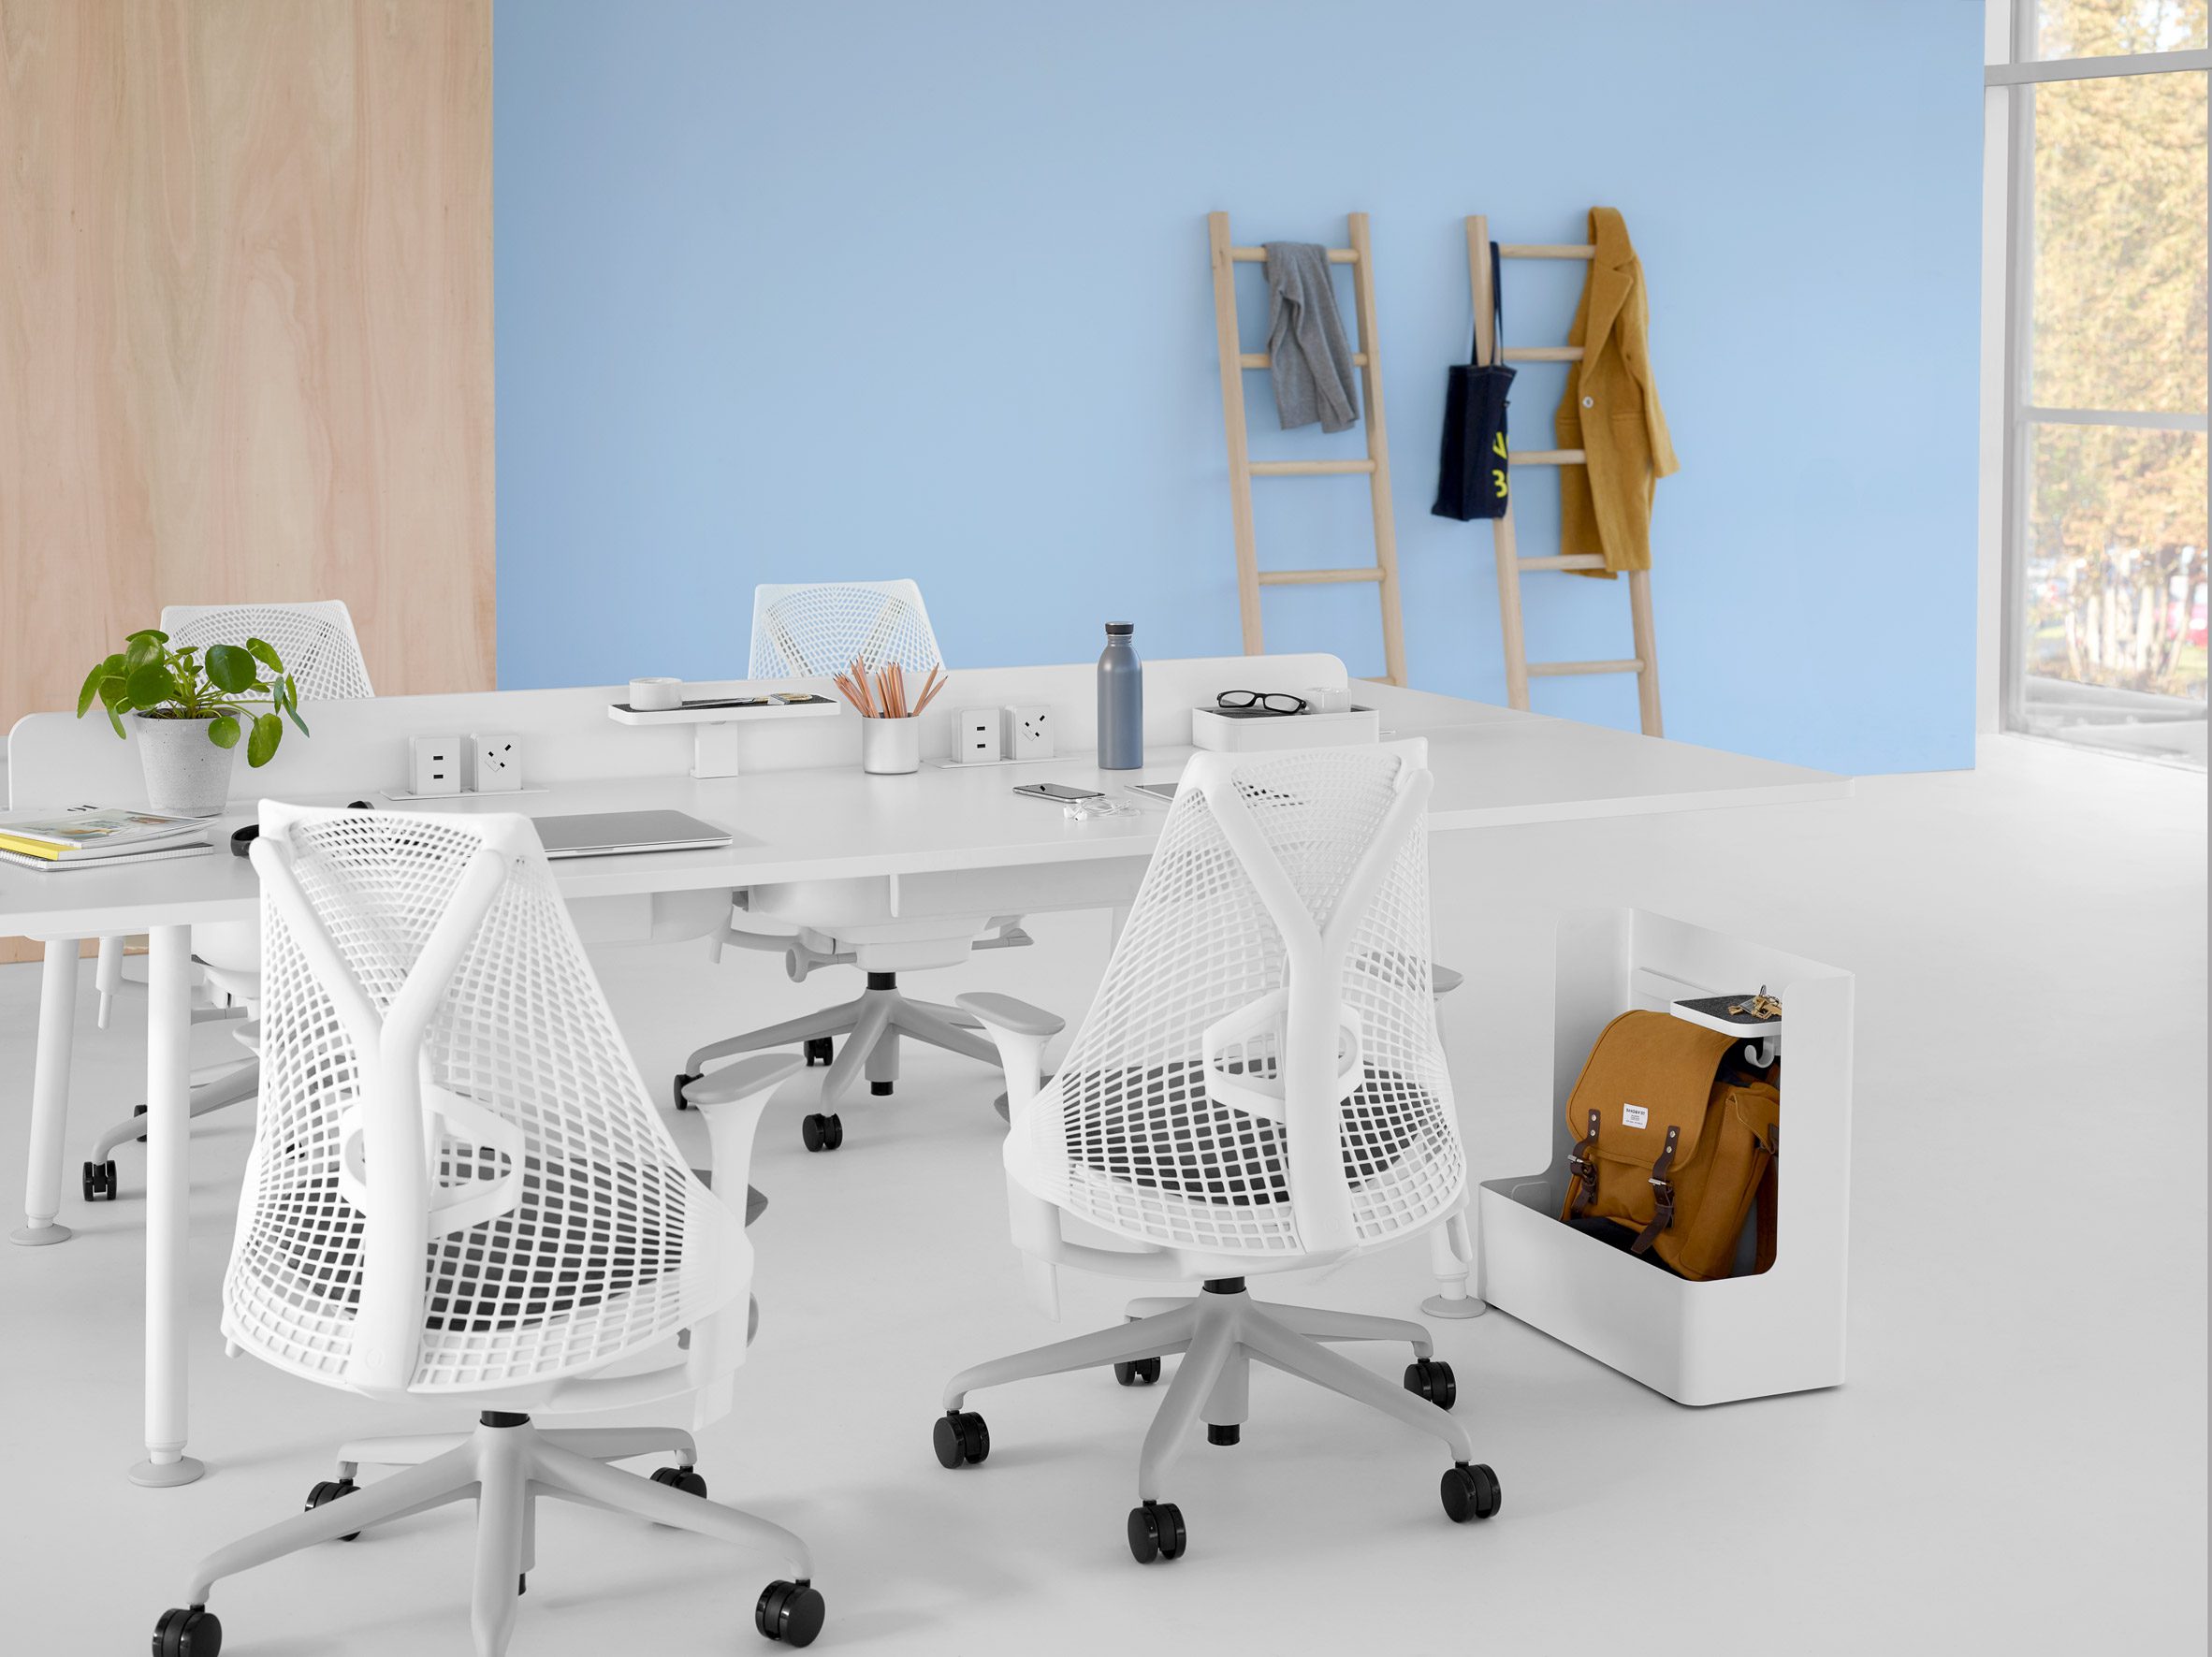 Herman Miller and Yves Béhar's Sayl chairs photographed around a shared work table in a clean and white office environment